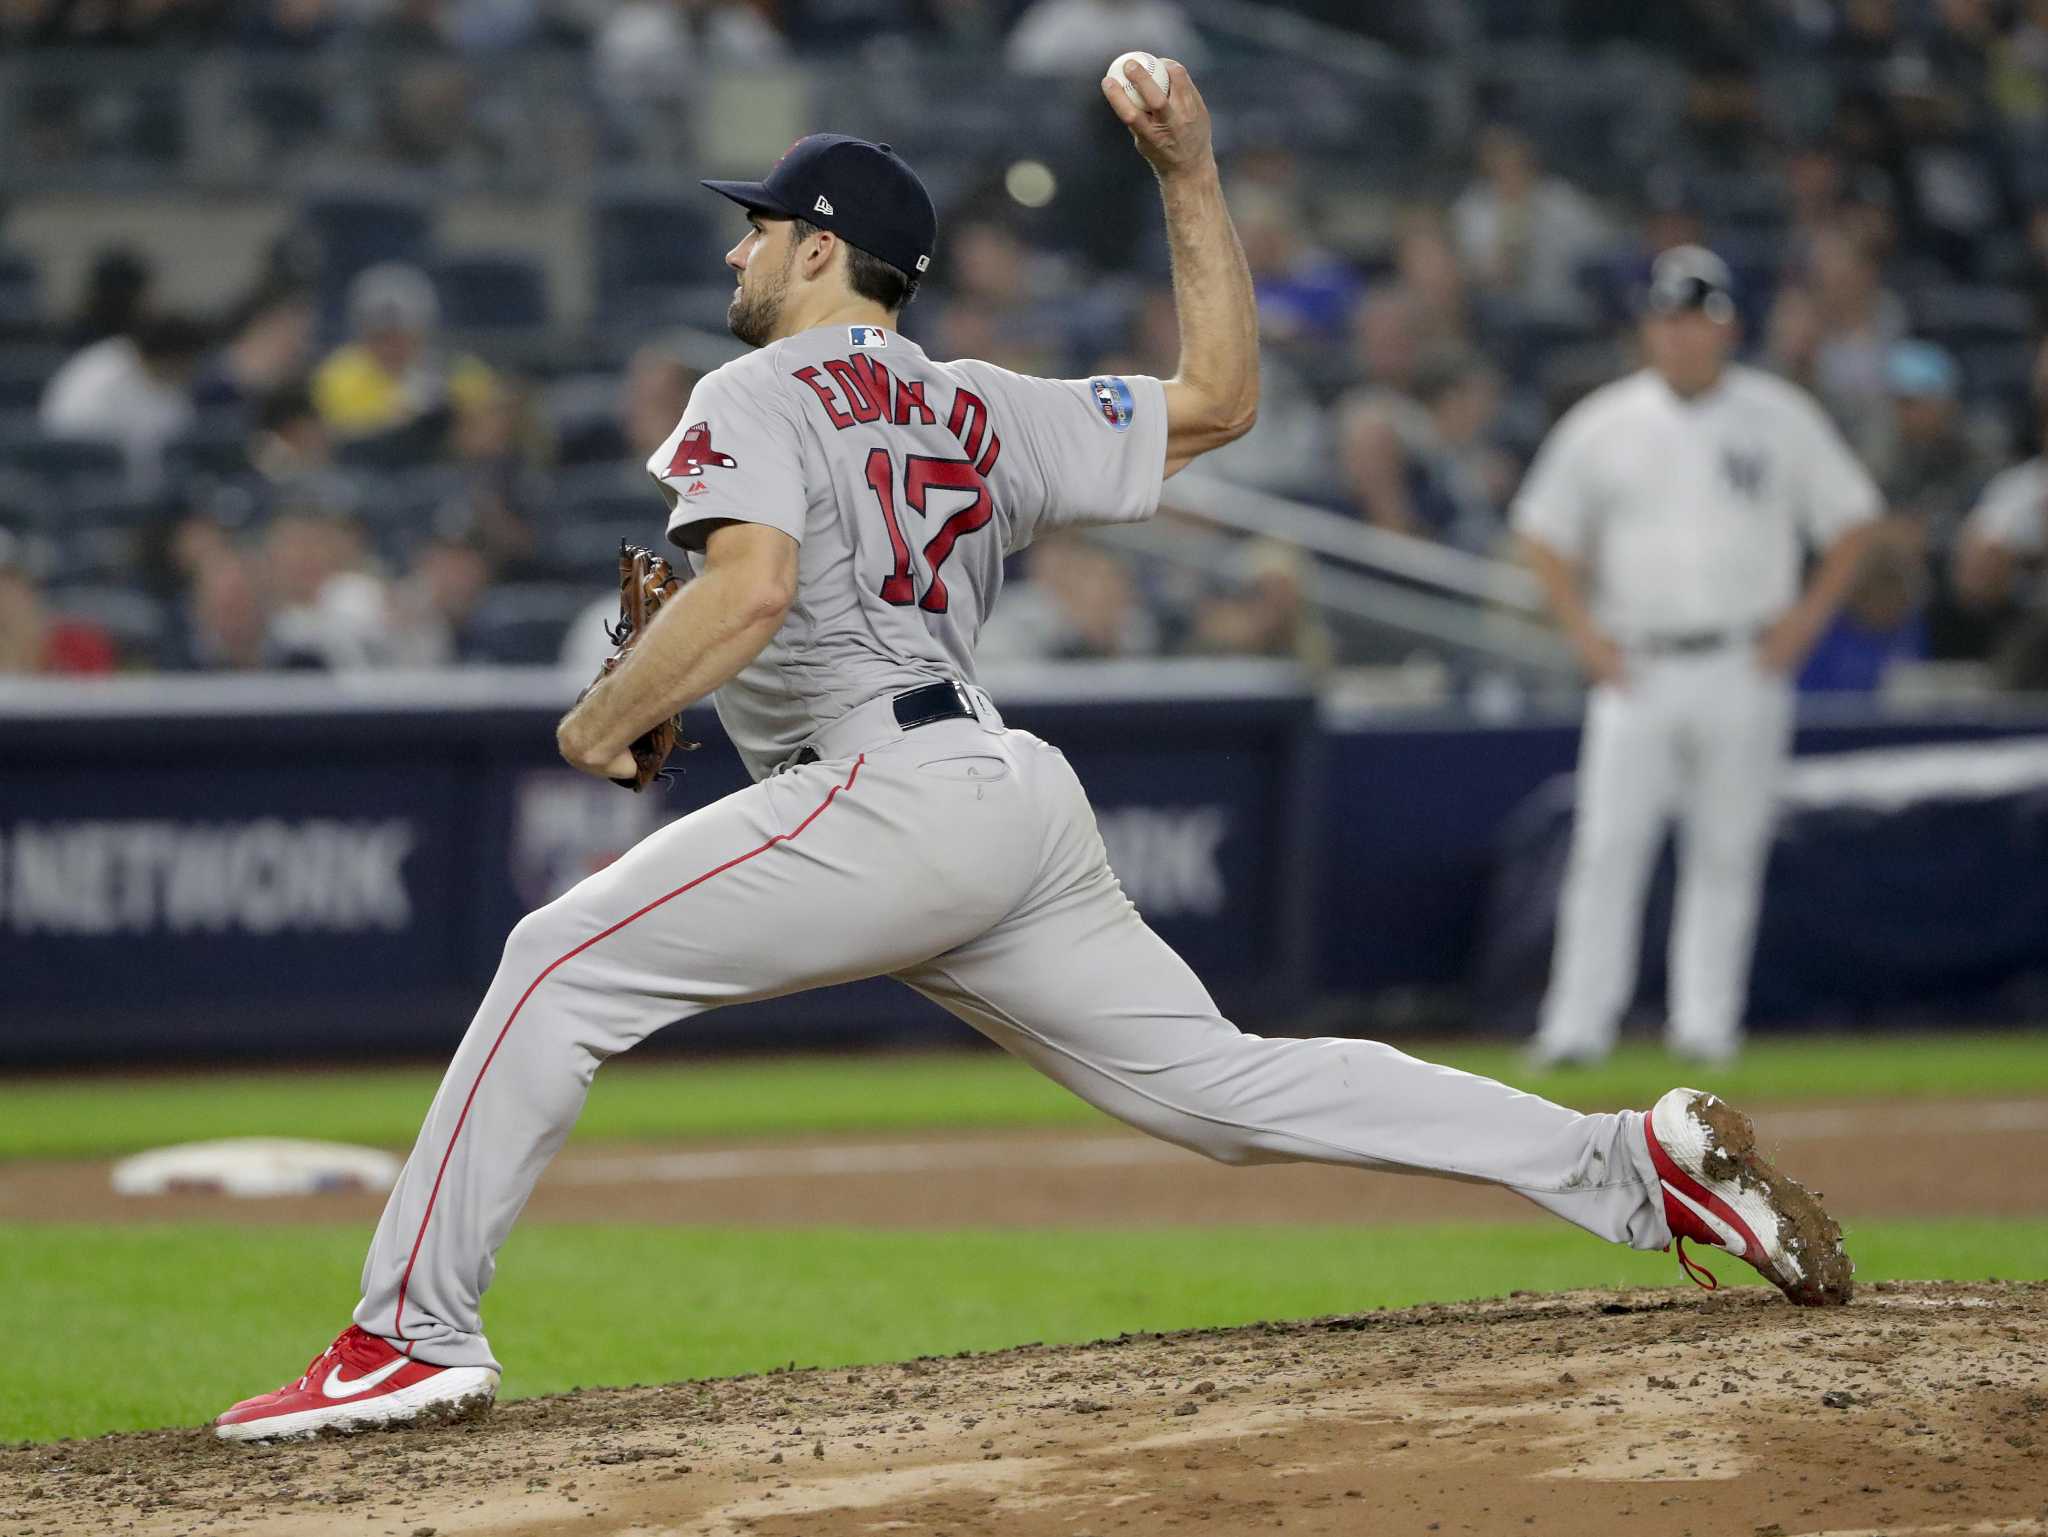 Red Sox' Nathan Eovaldi admits he doesn't like Astros before ALCS